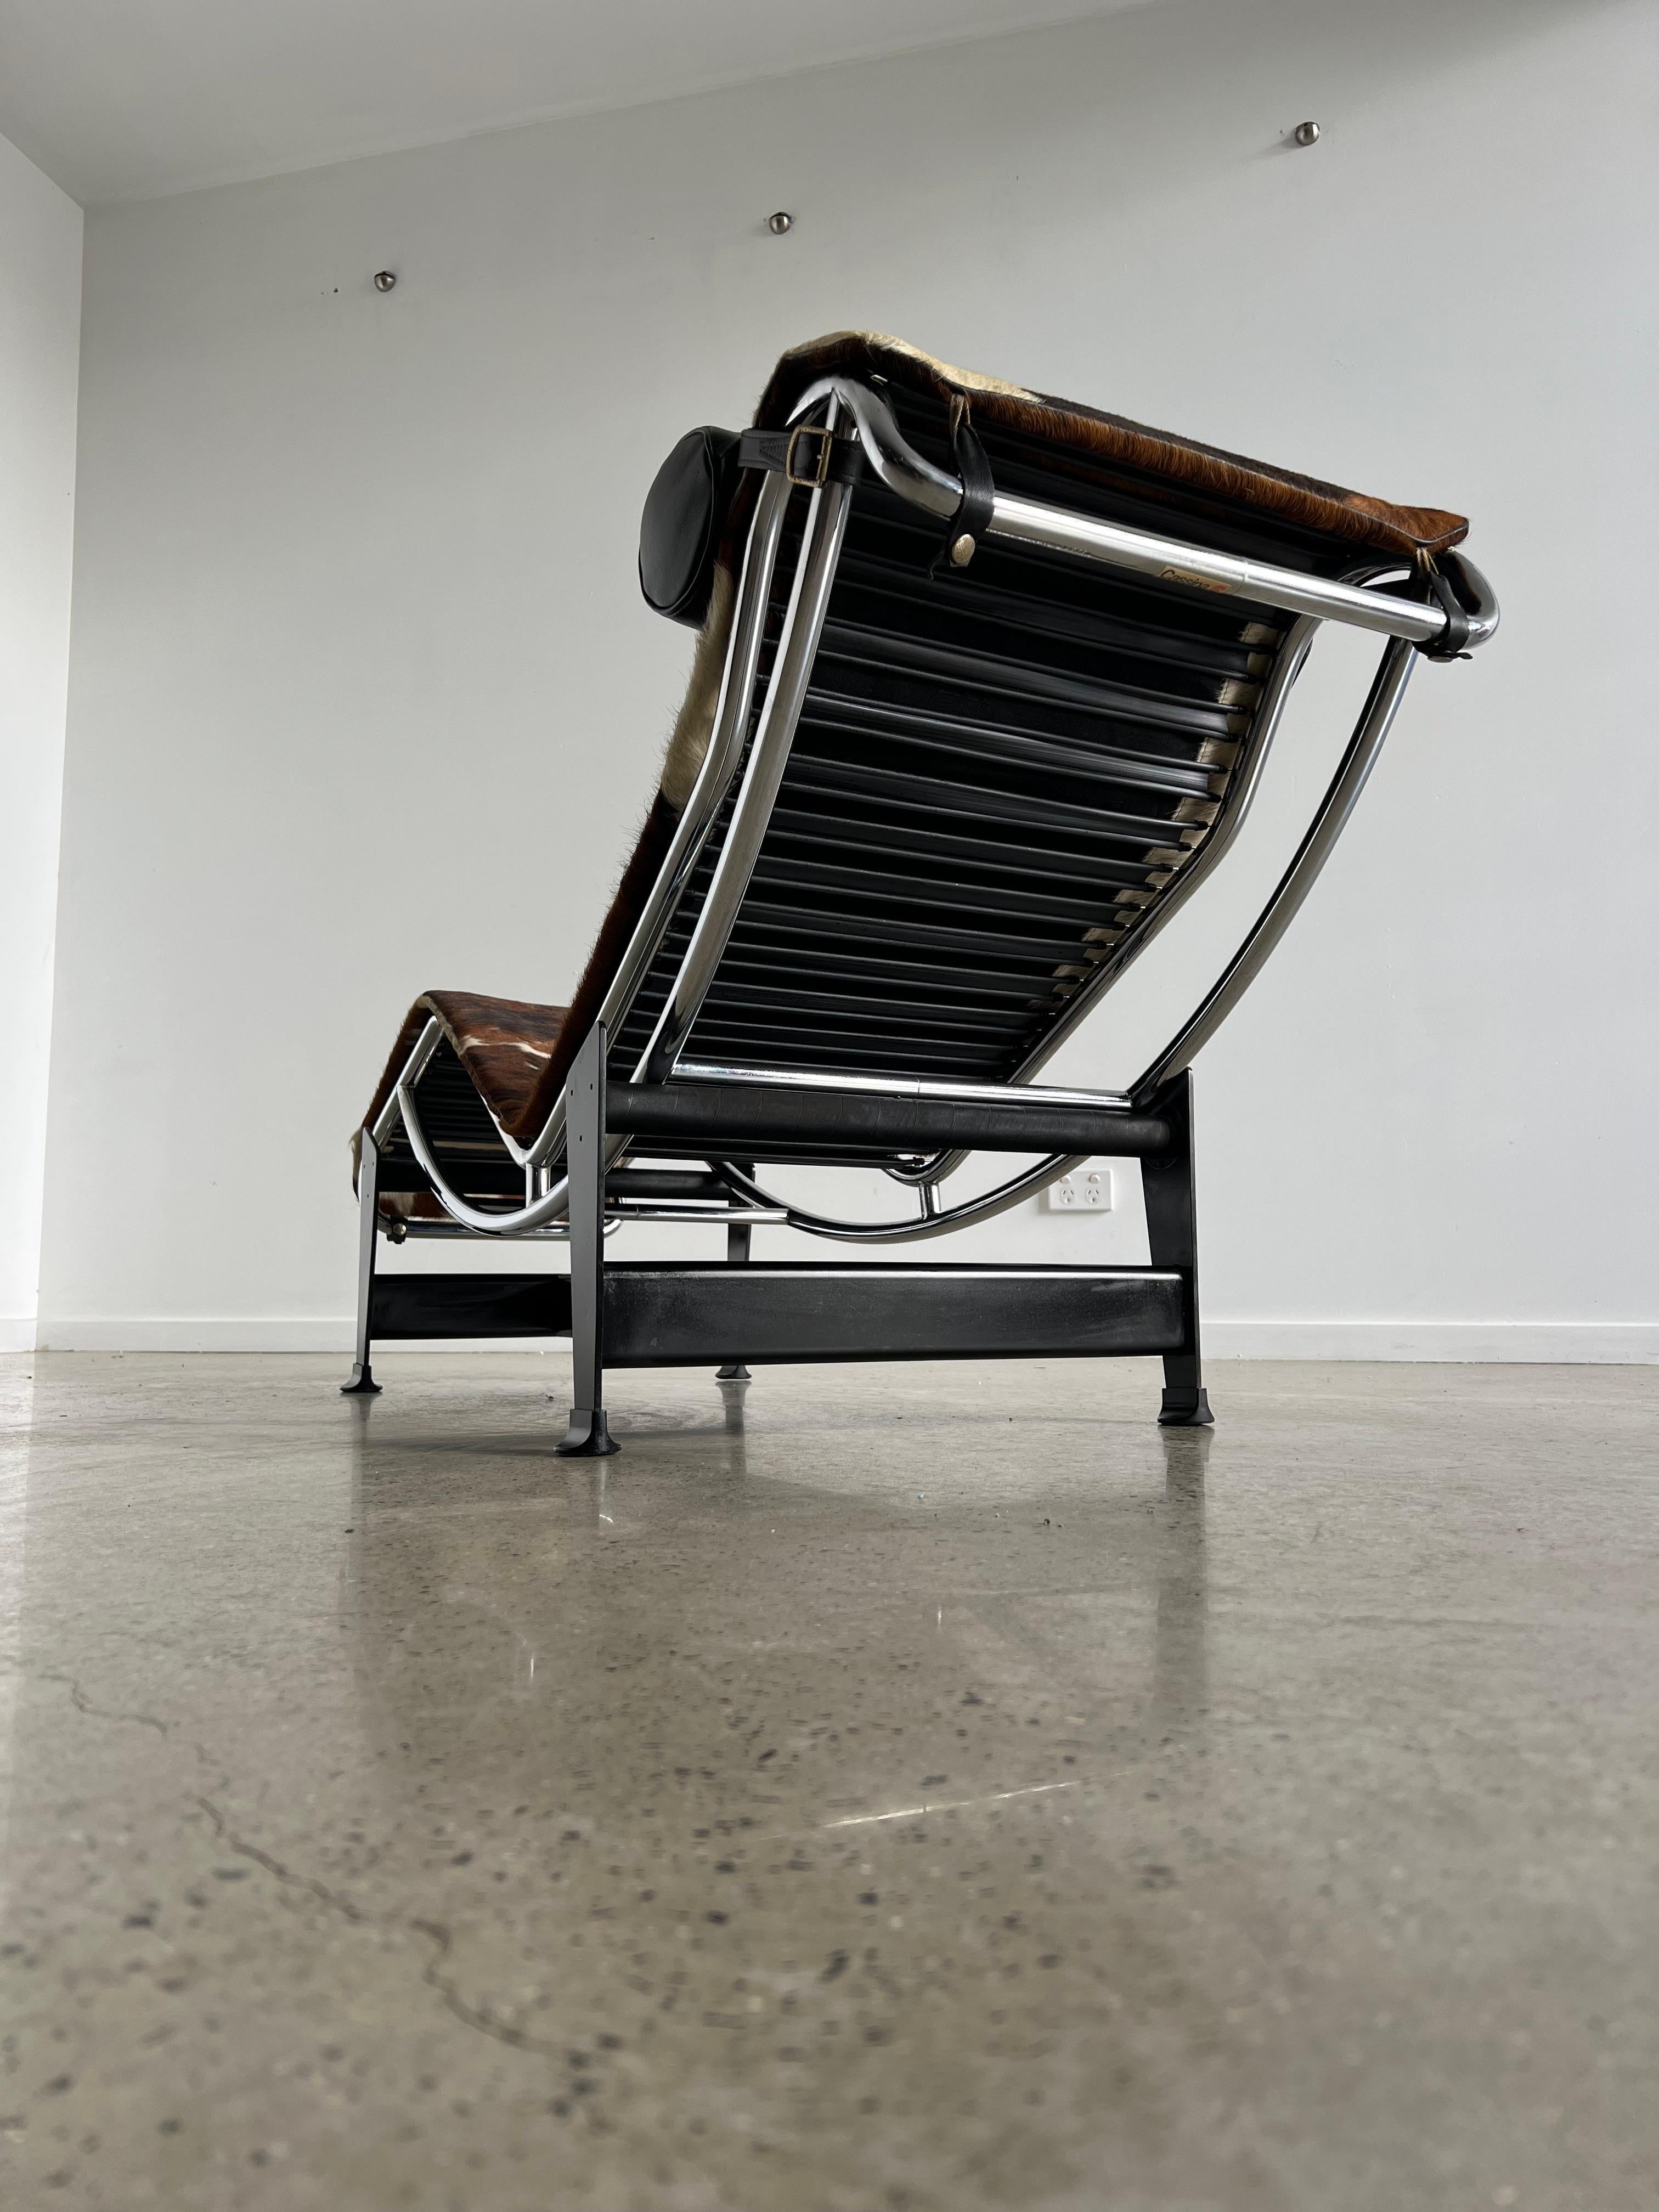 Designed by Le Corbusier, Pierre Jeanneret and Charlotte Perriand in 1928 and made famous since 1965 by Cassina. LC4 is a chaise lounge with variable inclination with cradle in polished chromed steel and pedestal in black painted steel. Mattress of